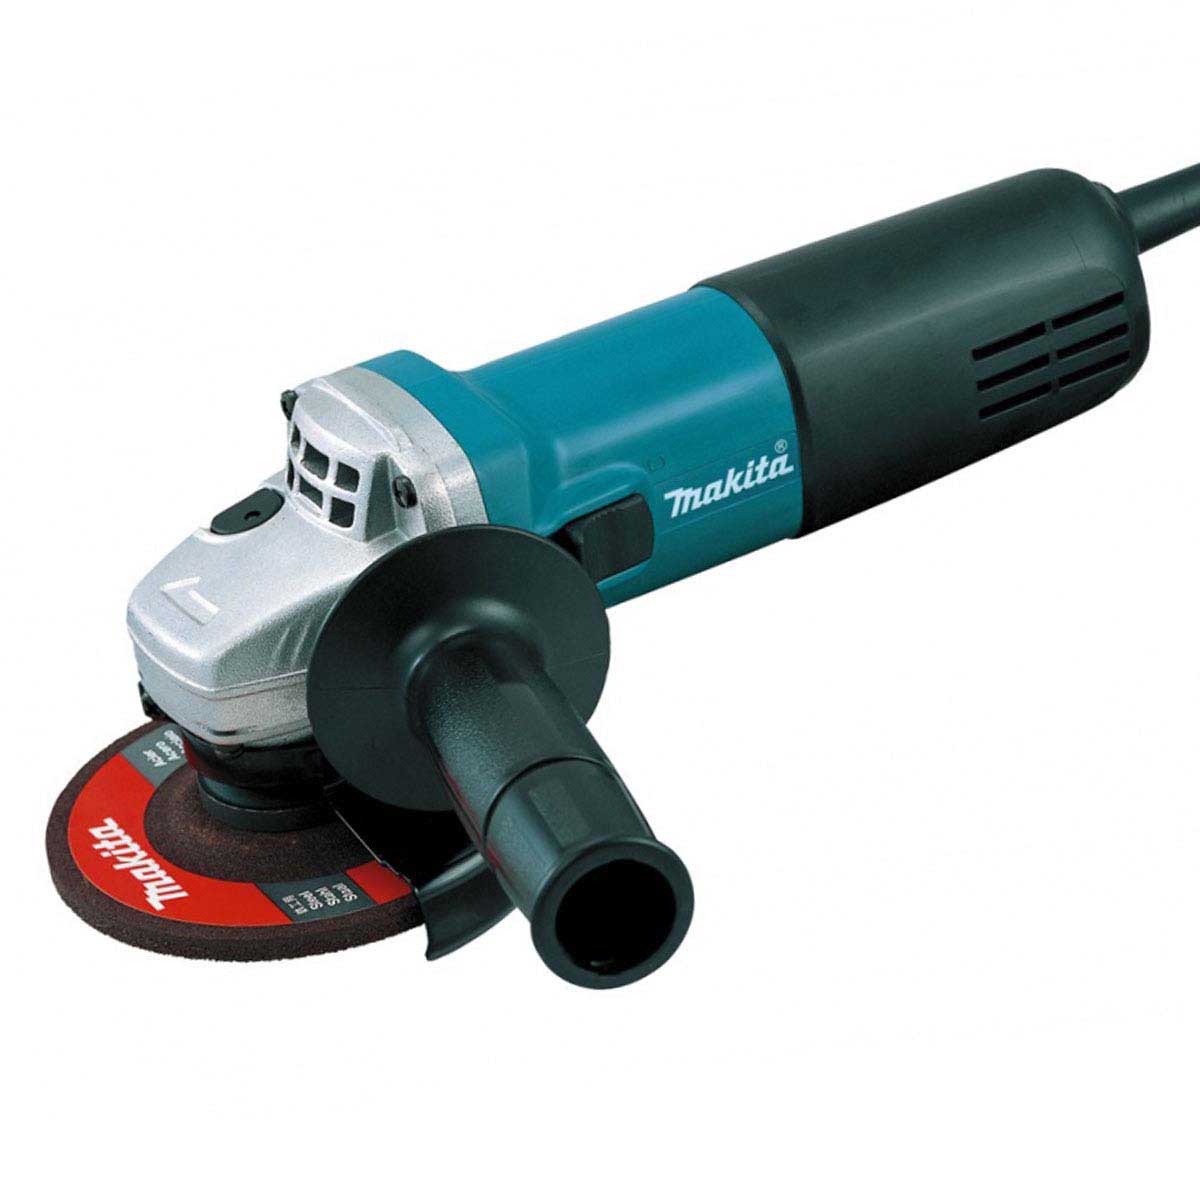 Grinding and cutting blade, 5 inches, 710 watts